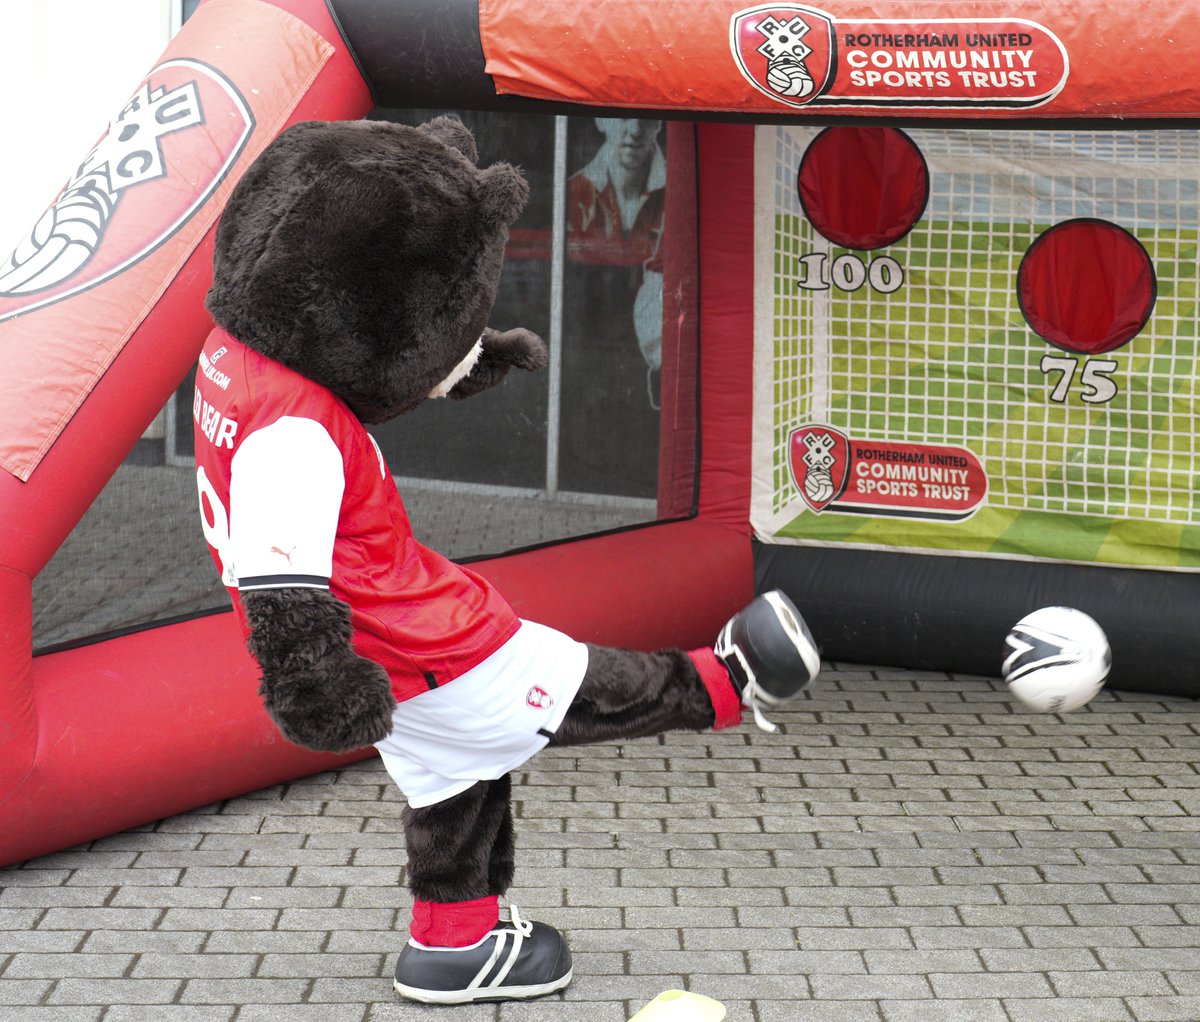 Bend it like Miller! 🪄 Why not come and have a go on the @RUFC_CT games on the forecourt of AESSEAL New York Stadium before kick off? #rufc 🐻